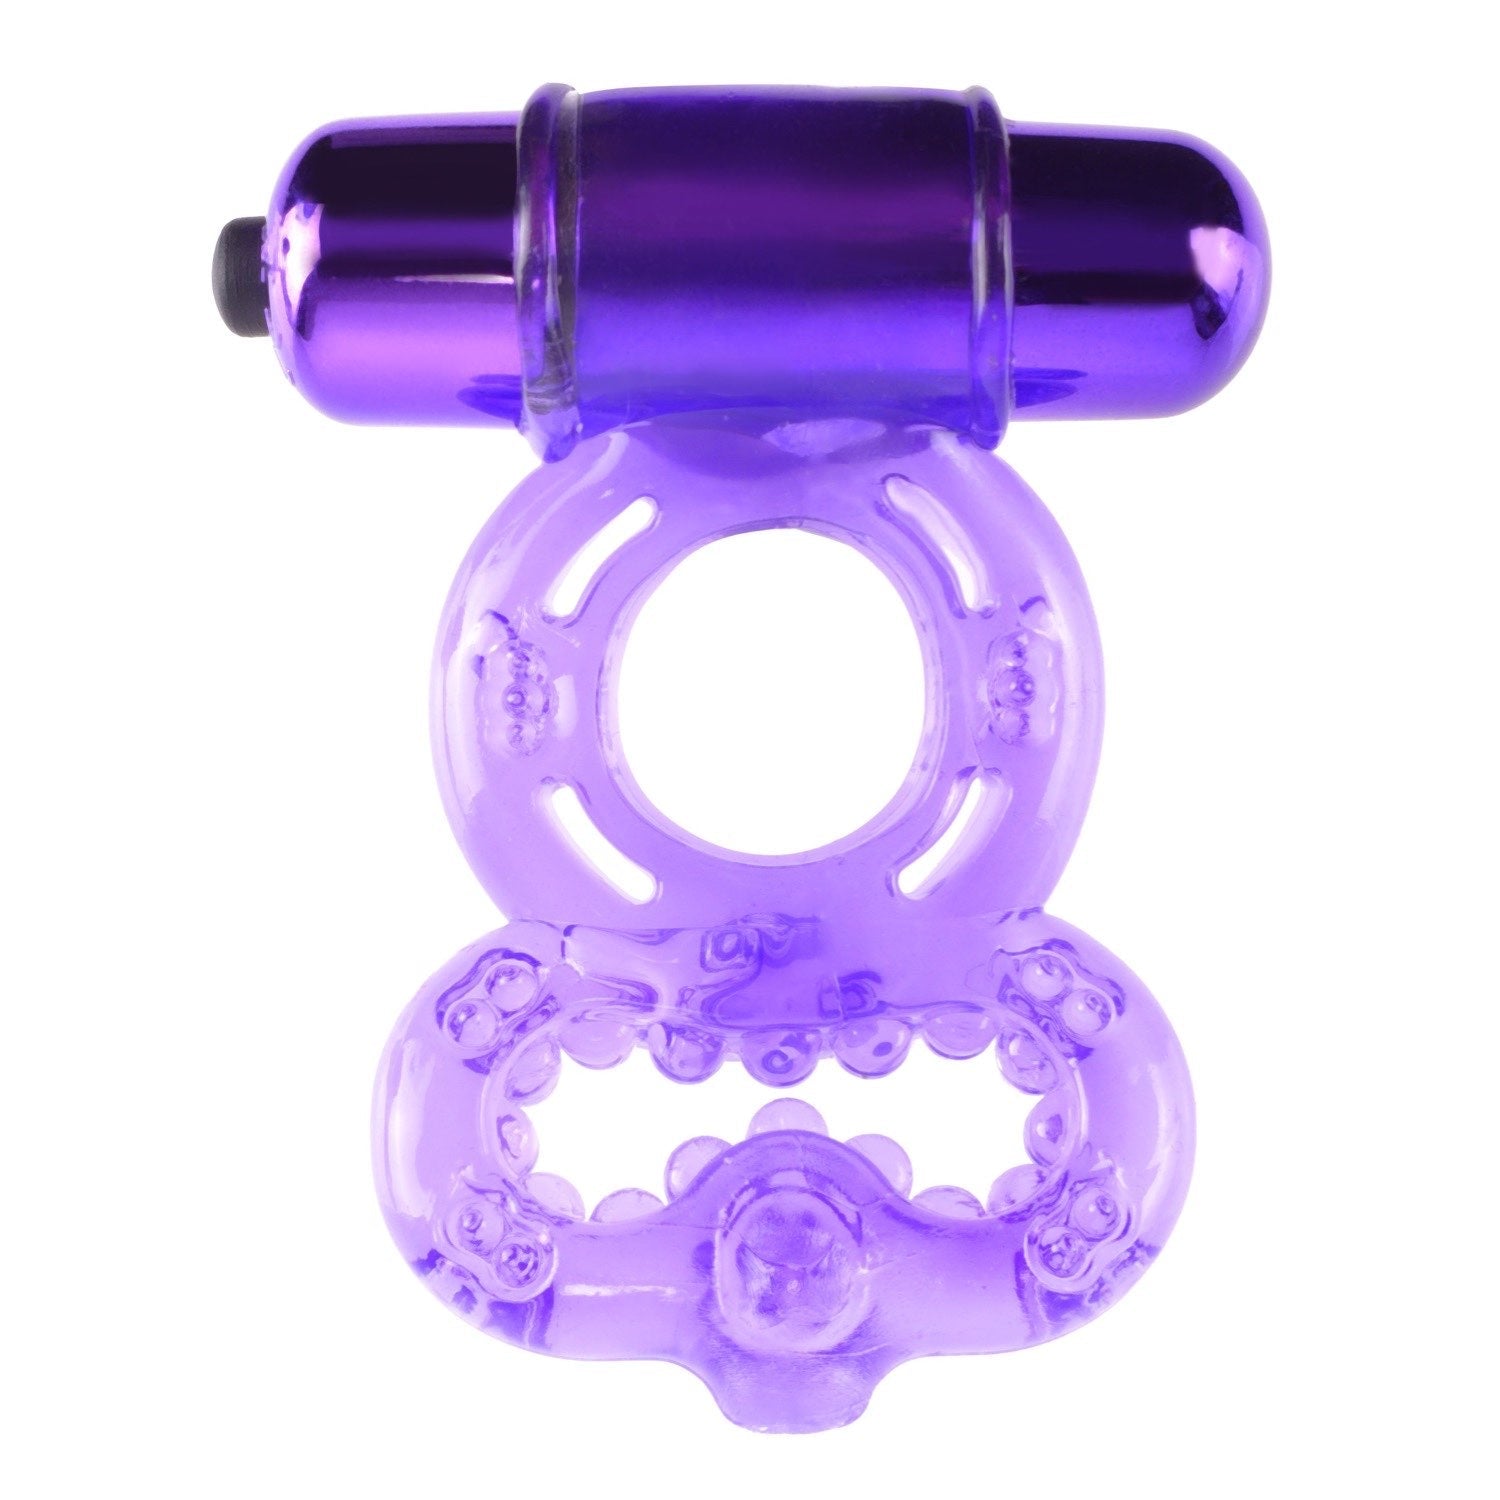 Fantasy C-Ringz Infinity Super Ring - Purple Vibrating Cock &amp; Balls Ring by Pipedream